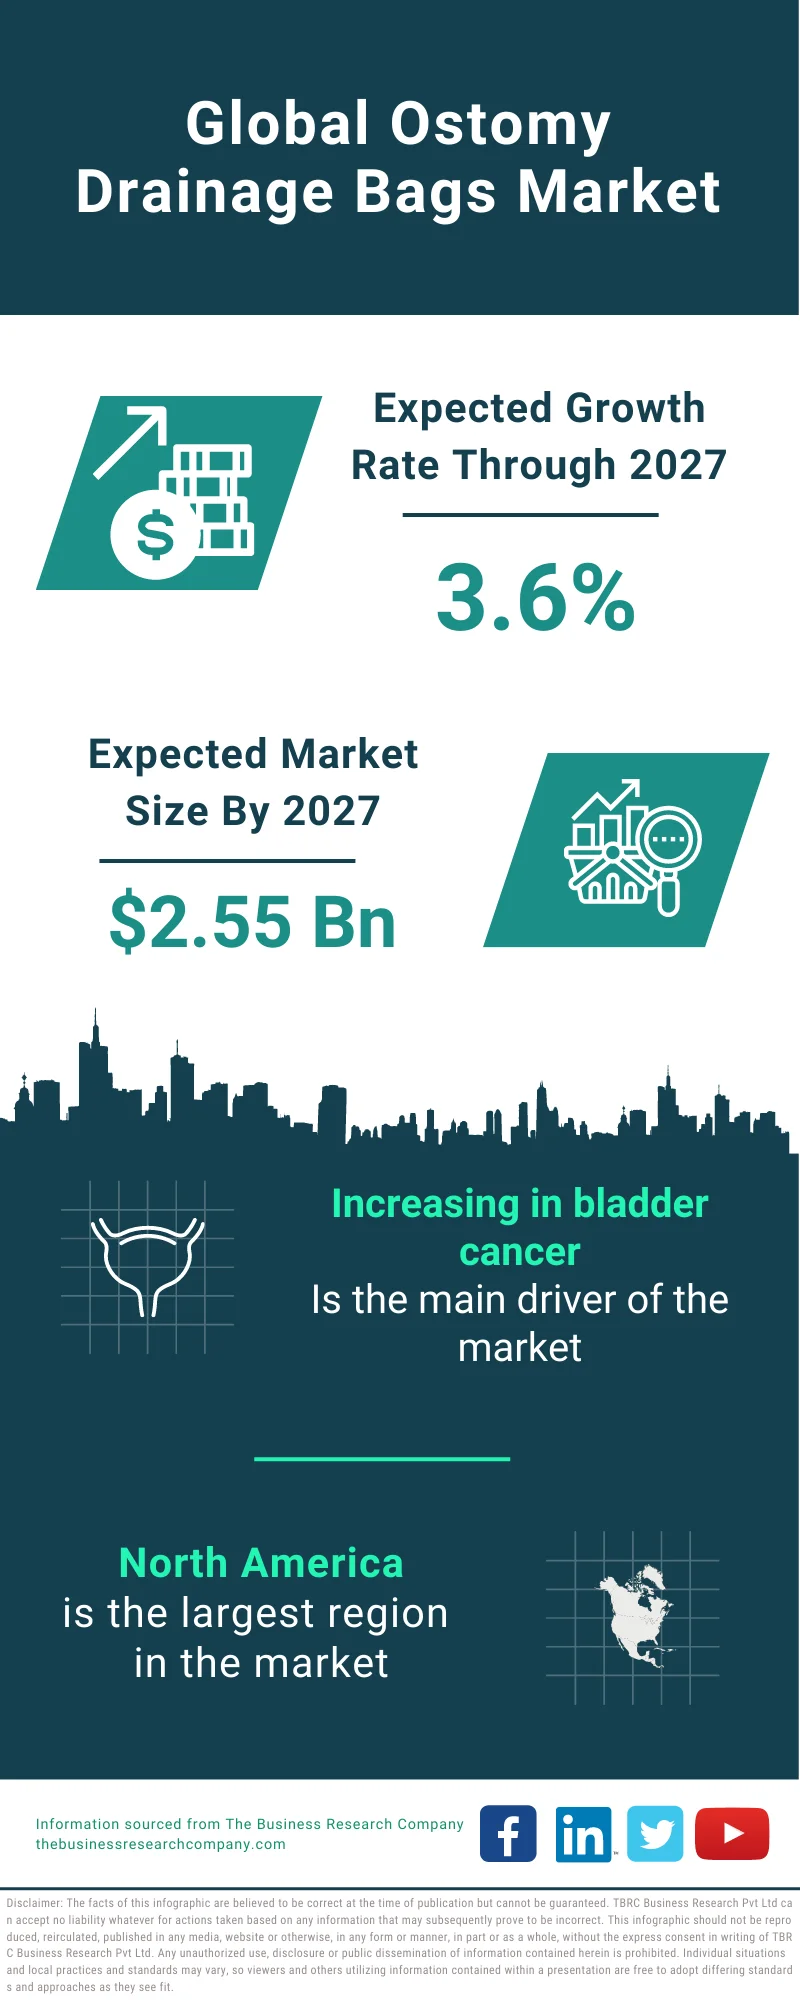 https://www.thebusinessresearchcompany.com/infographimages/230201_GMR_Ostomy_Drainage_Bags_Market.webp